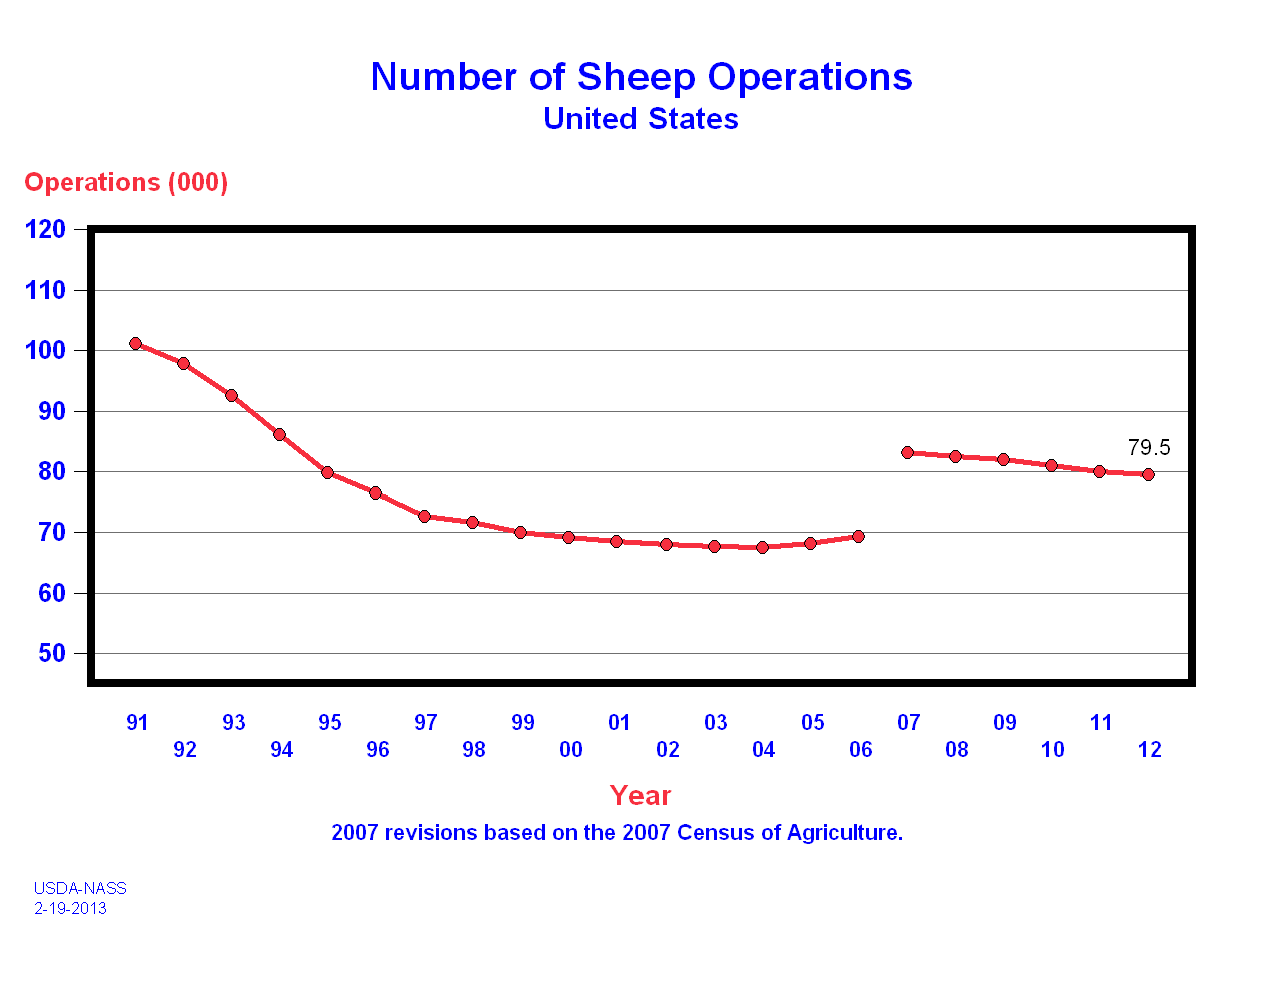 Sheep: Operations and Inventory by Year, US